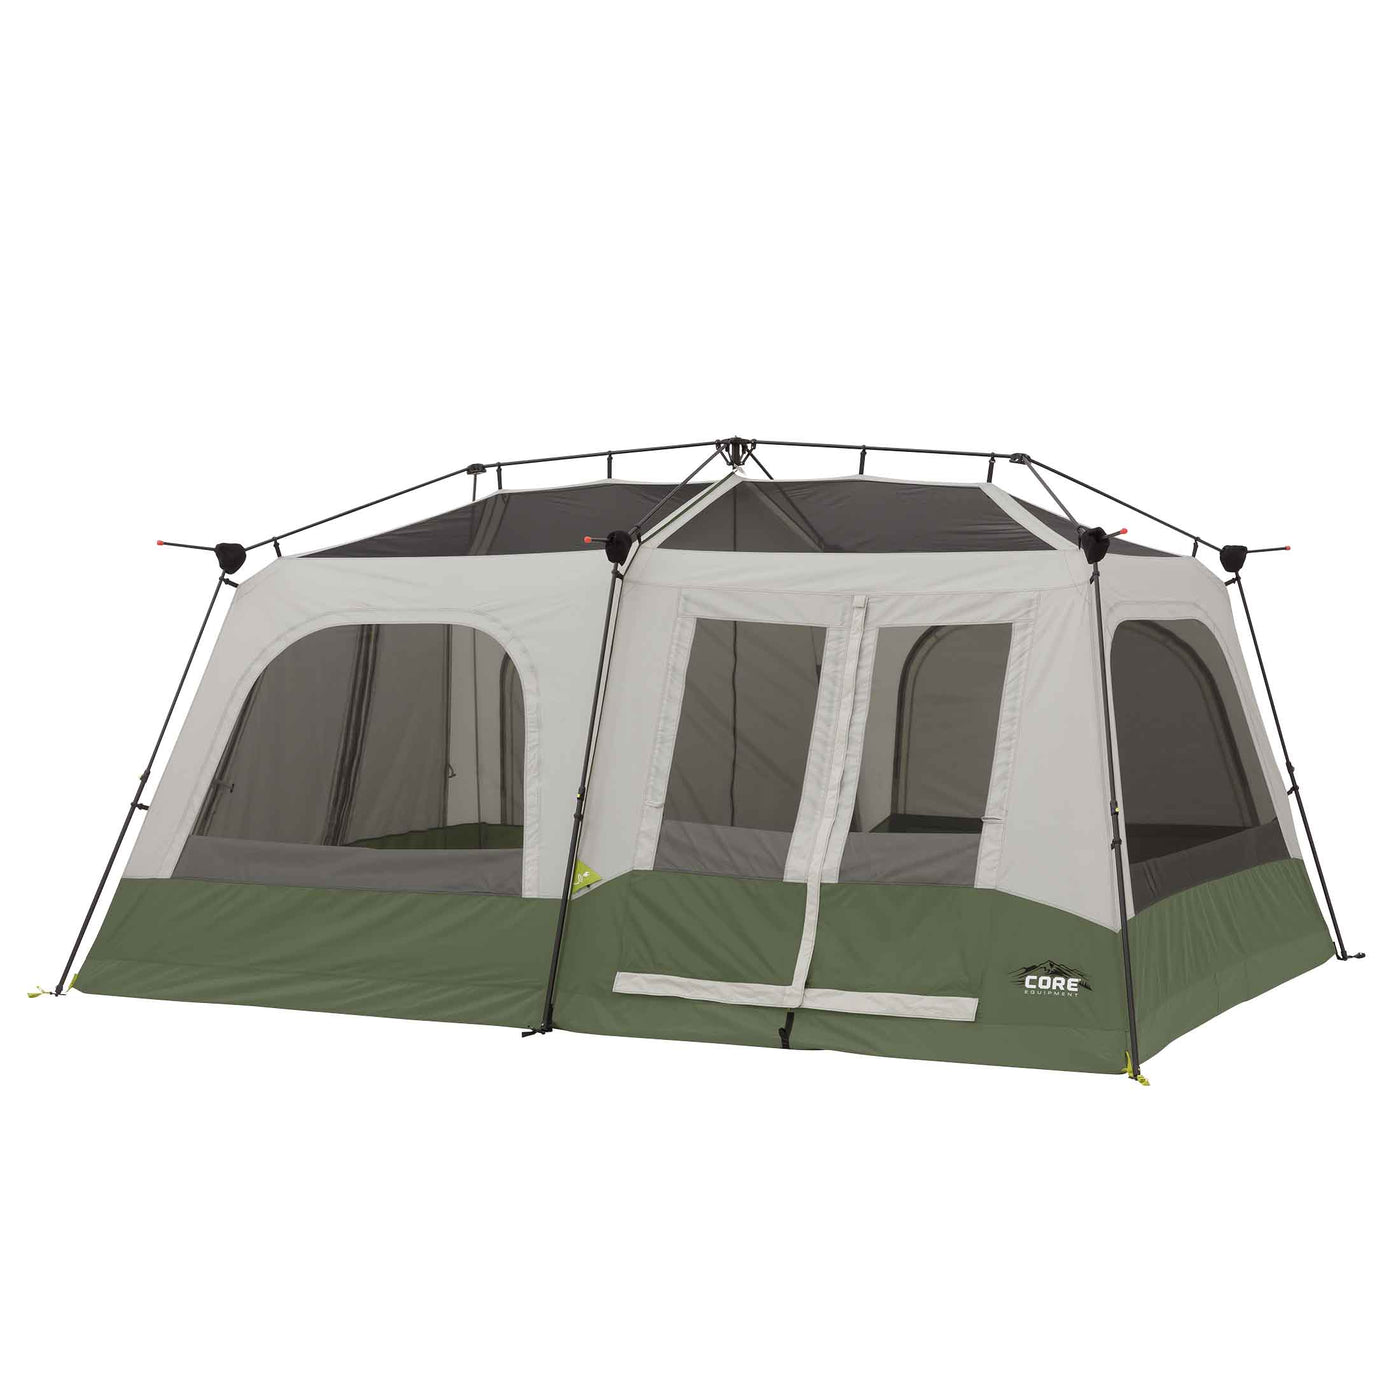 Core Equipment 10 Person Lighted Instant Cabin Tent w/ Full